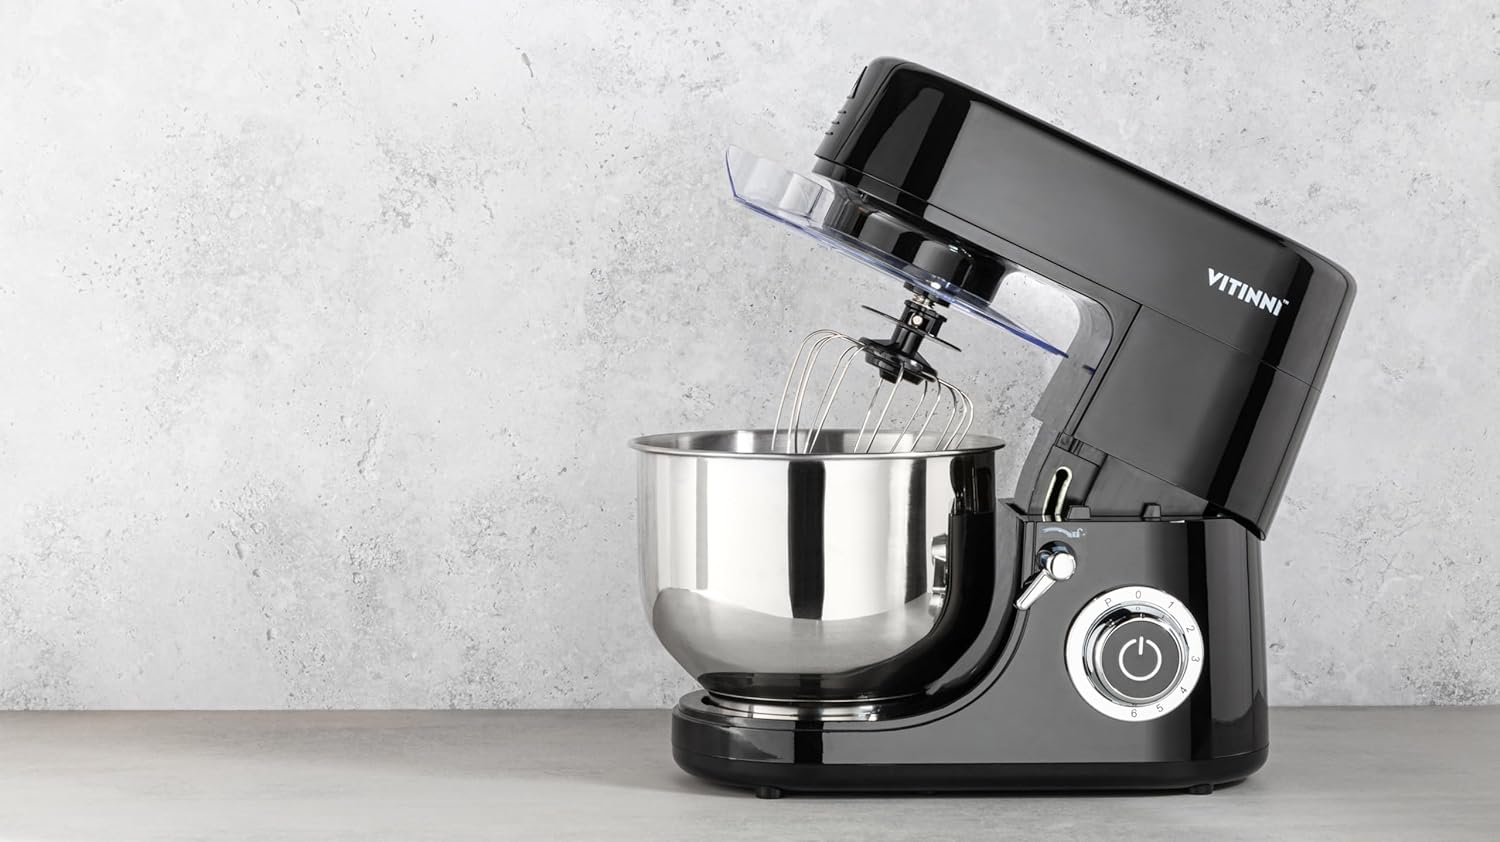 Vitinni Stand Mixer – Powerful 1500W Baking Mixer, 6L Stainless Steel Bowl, Digital Timer 6 Speed Control, 3 Multipurpose Attachments Included, Whisk, Flat Beater & Dough Hook, Splash Guard, Black - Amazing Gadgets Outlet